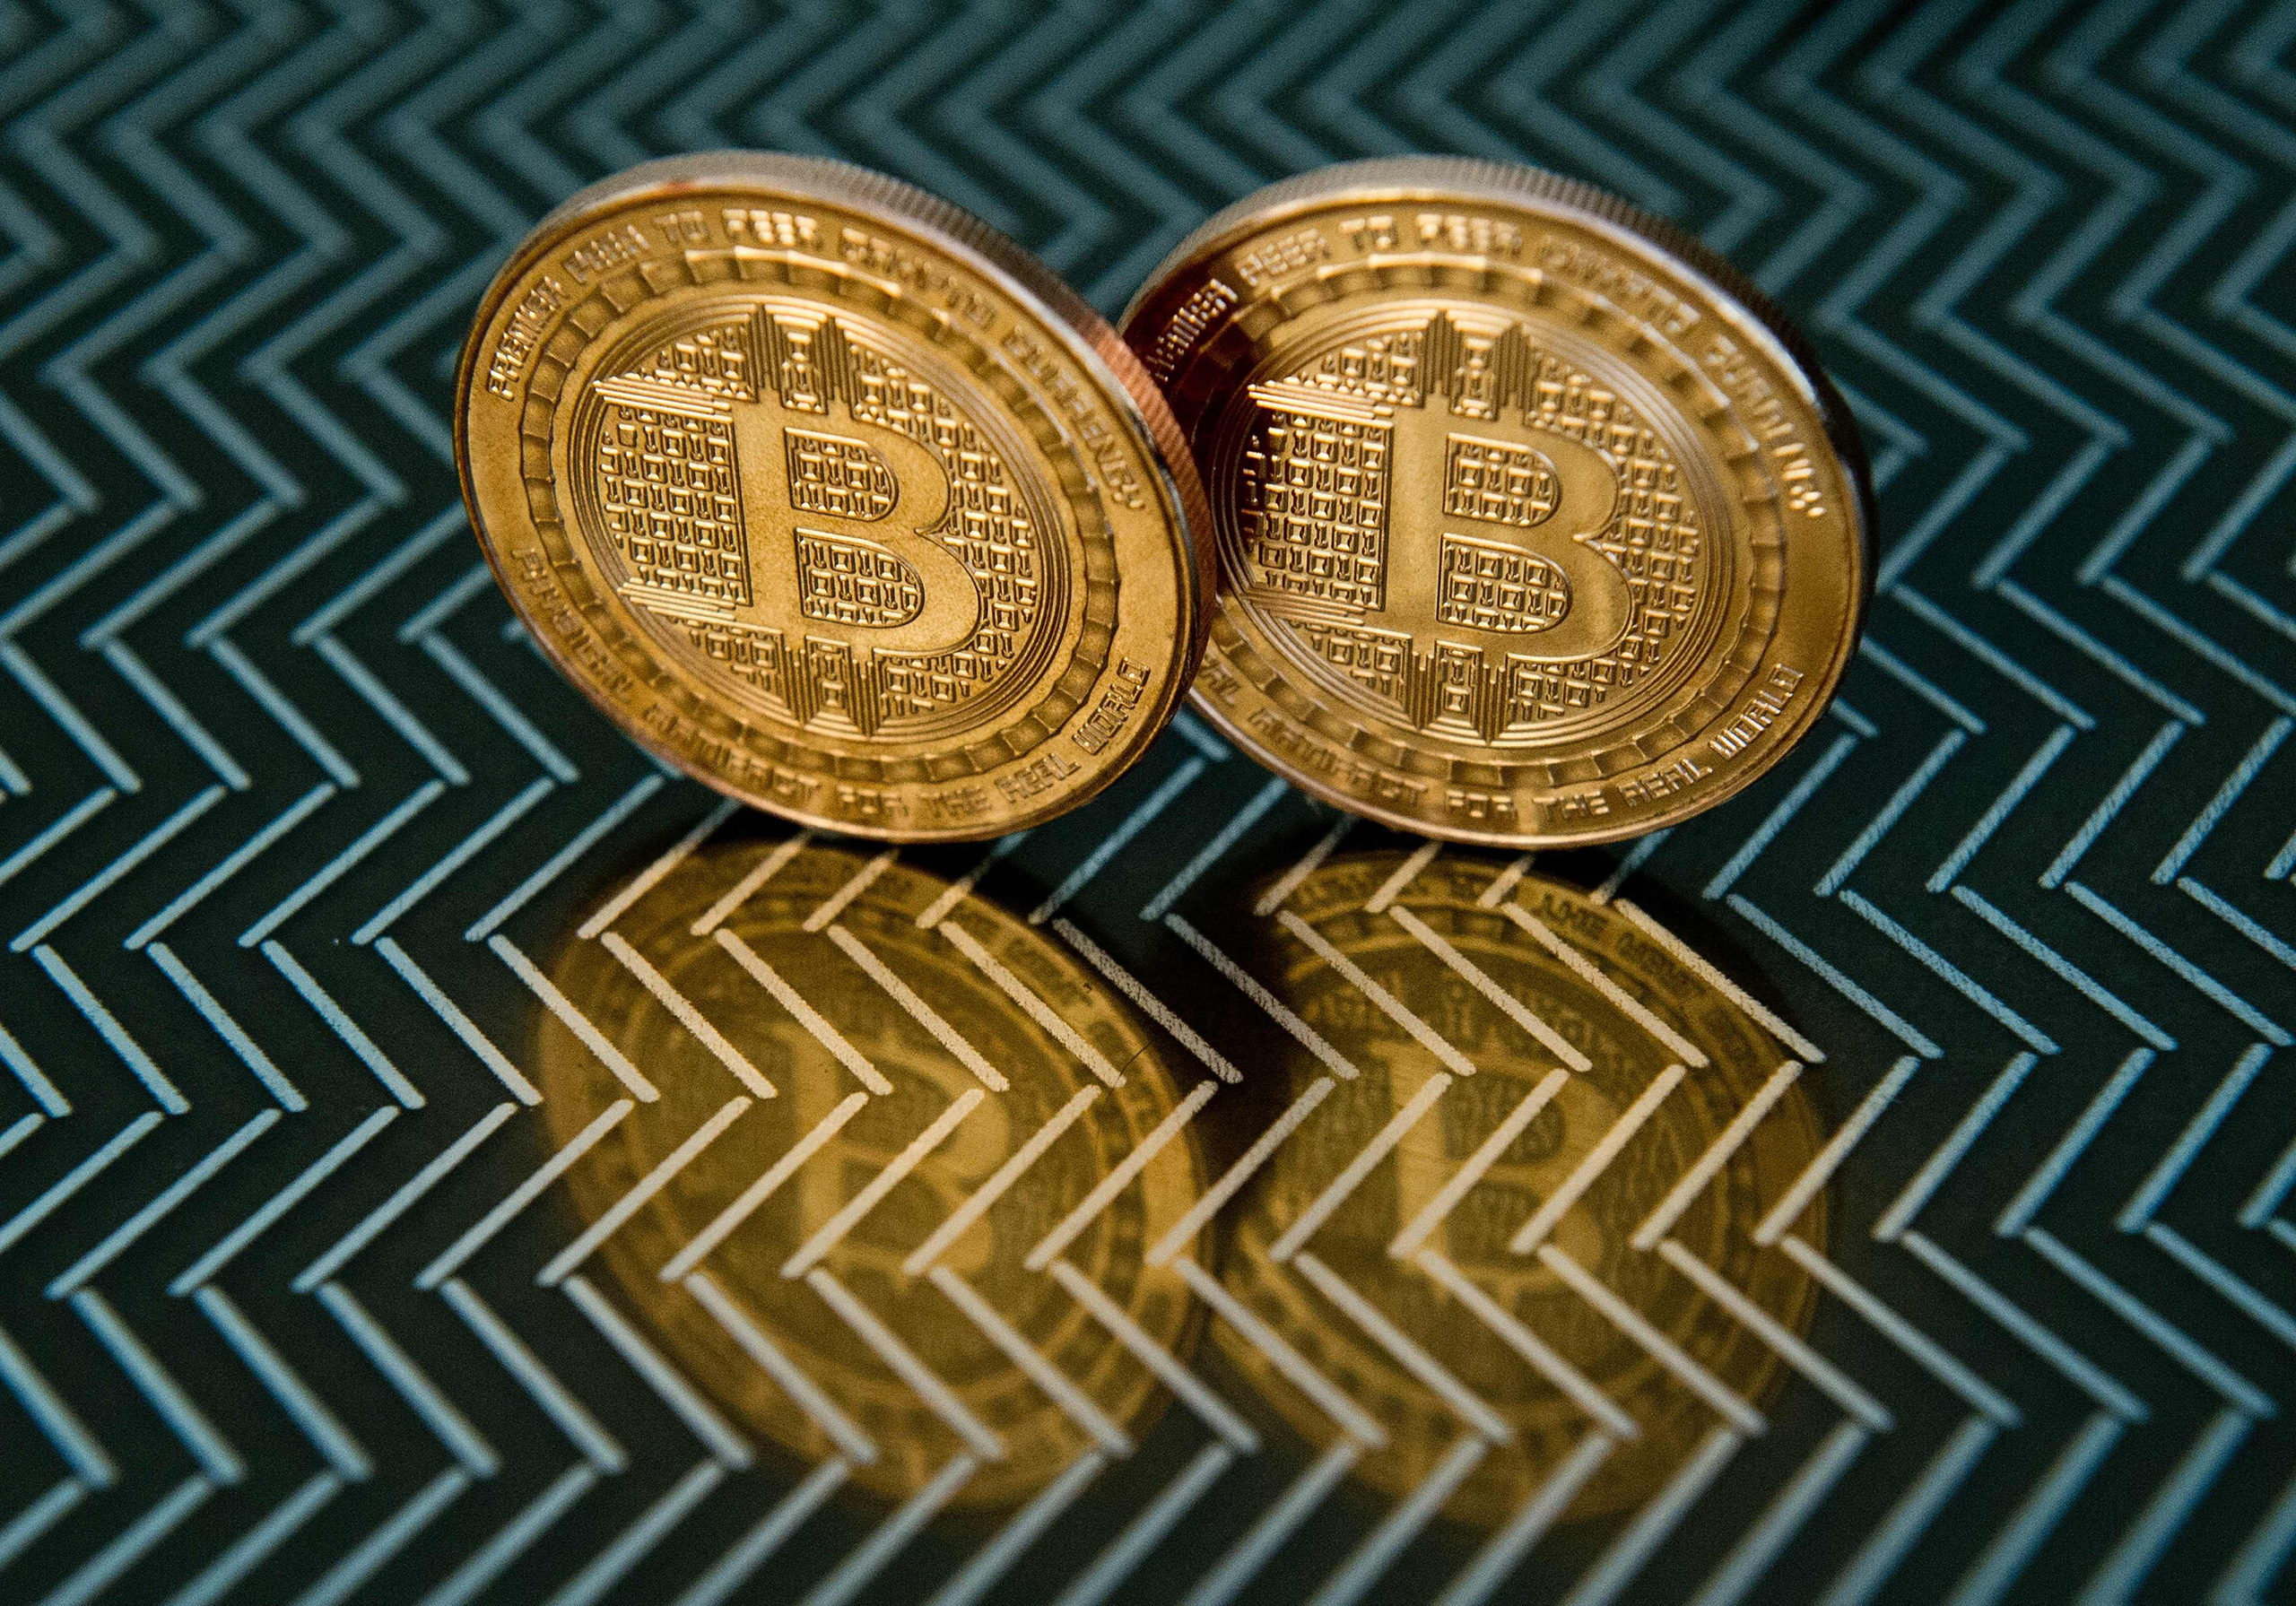 Bitcoin medals are seen in Washington, June 17, 2014. On May 2, an Australian entrepreneur, identified as Craig Wright, revealed himself as the creator following years of speculation about who invented the pioneering digital currency. (Karen Bleier—AFP/Getty Images)